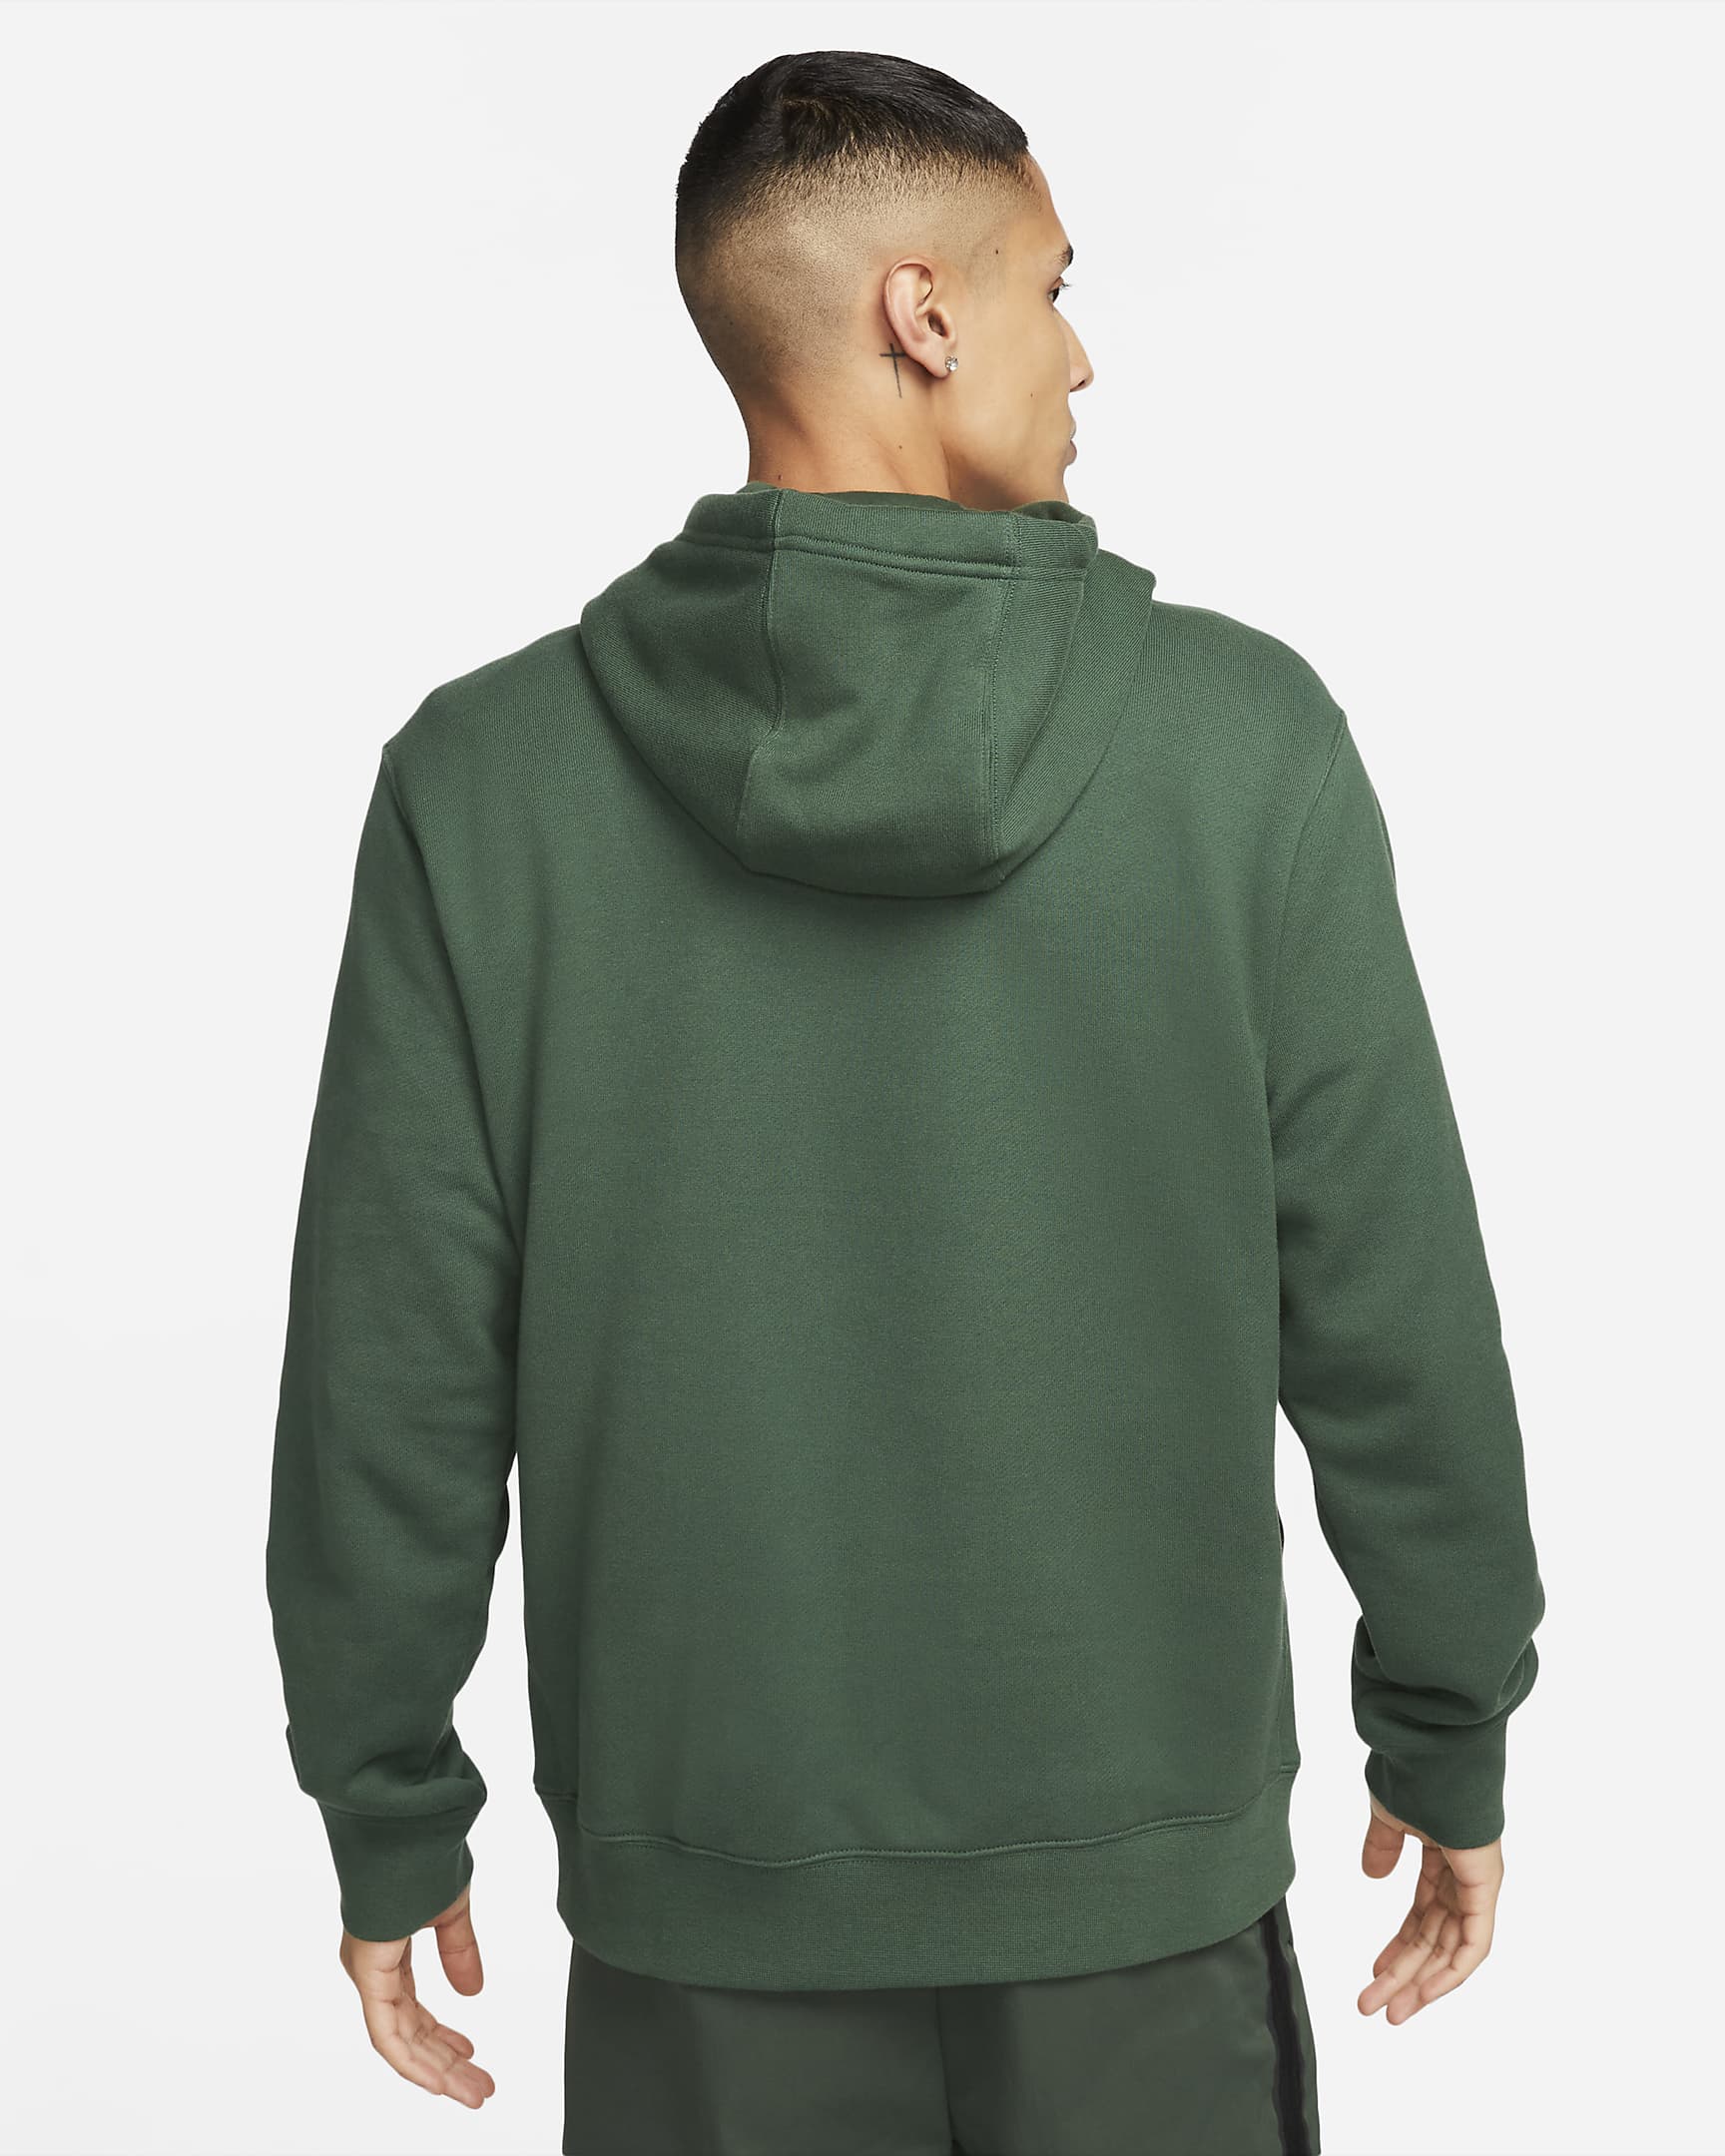 Men's French Terry Color-Blocked Hoodie - FB7415